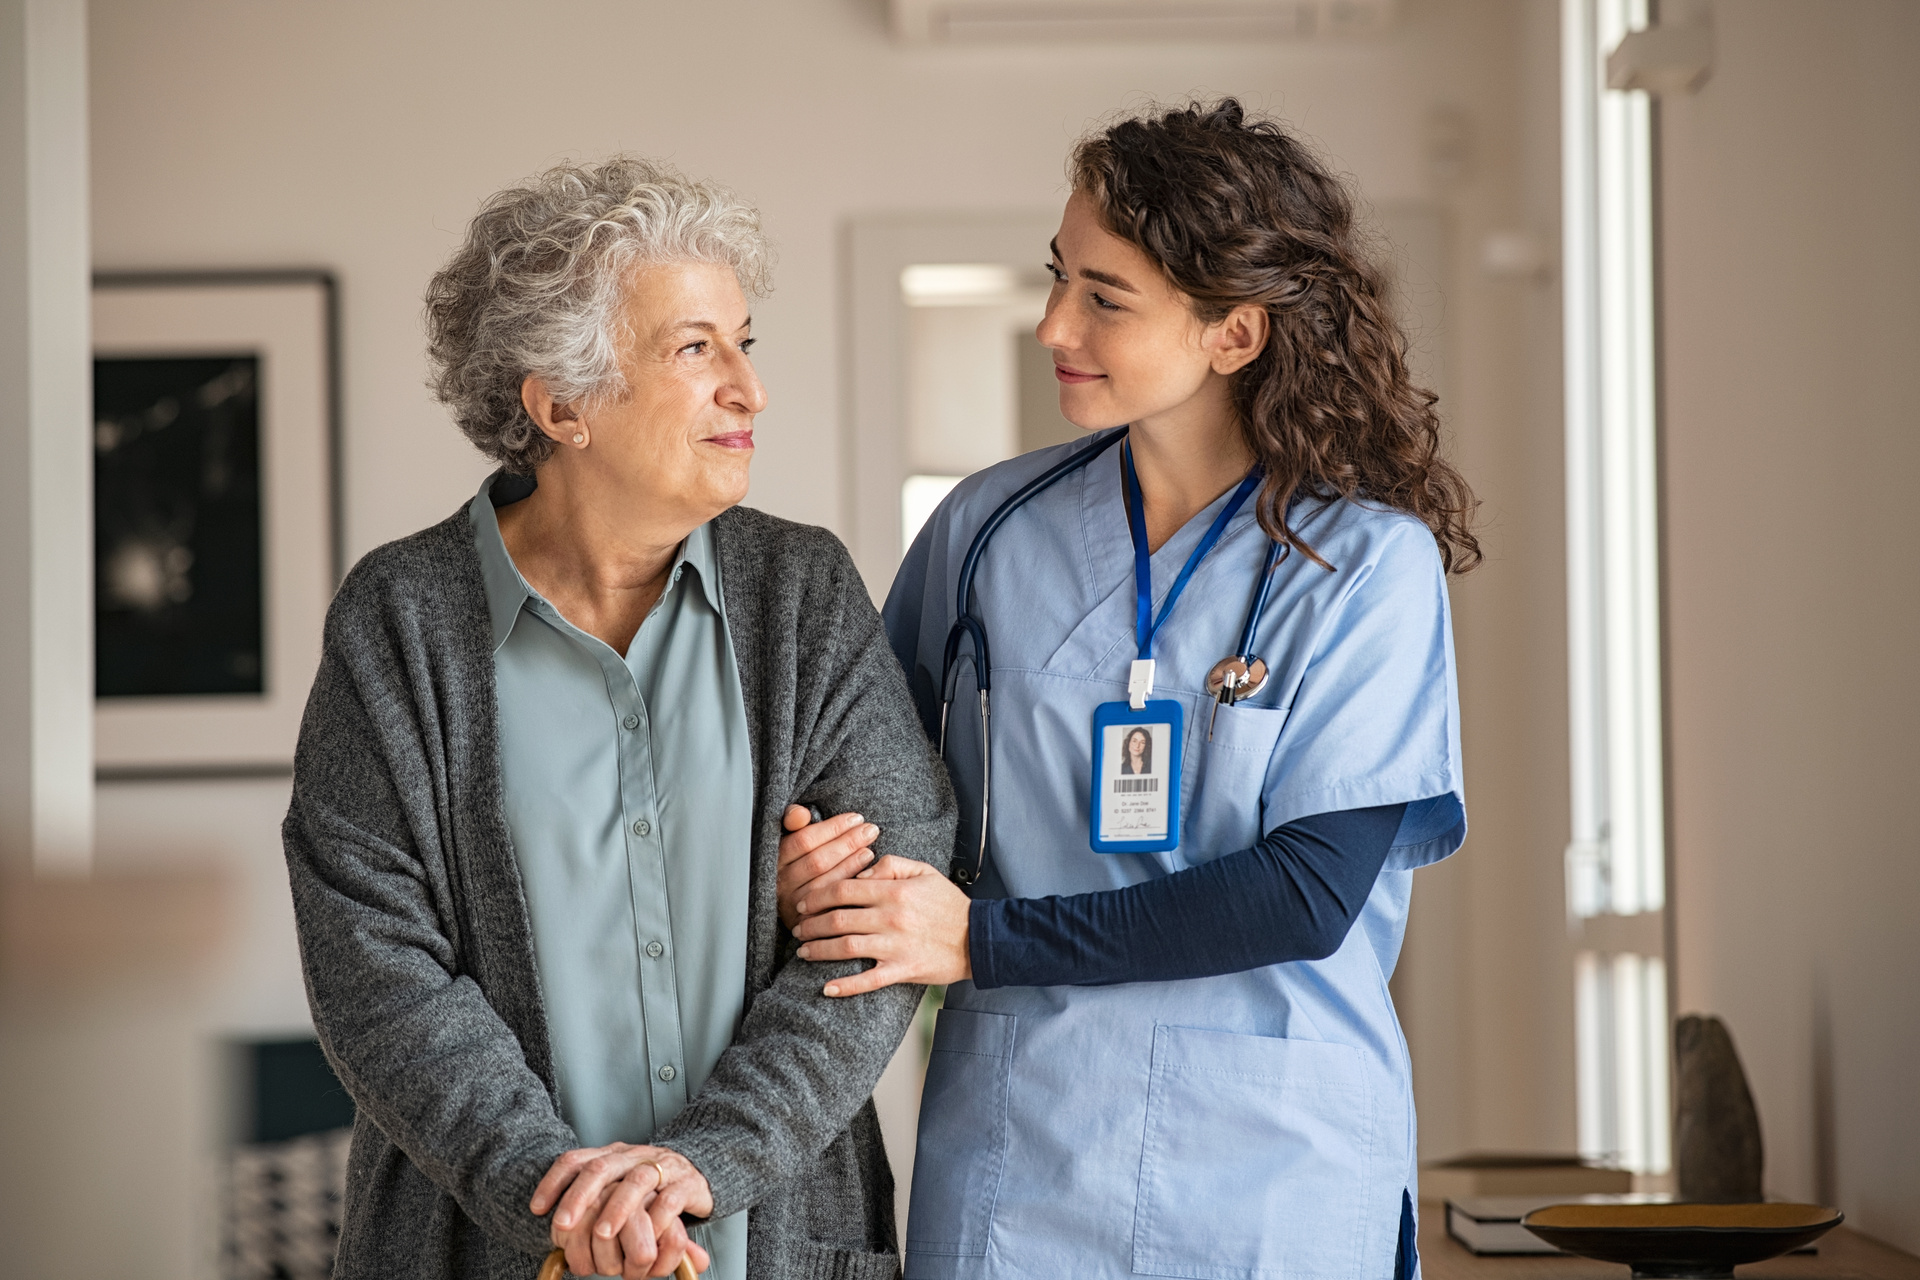 In home nurse provides care to senior patient